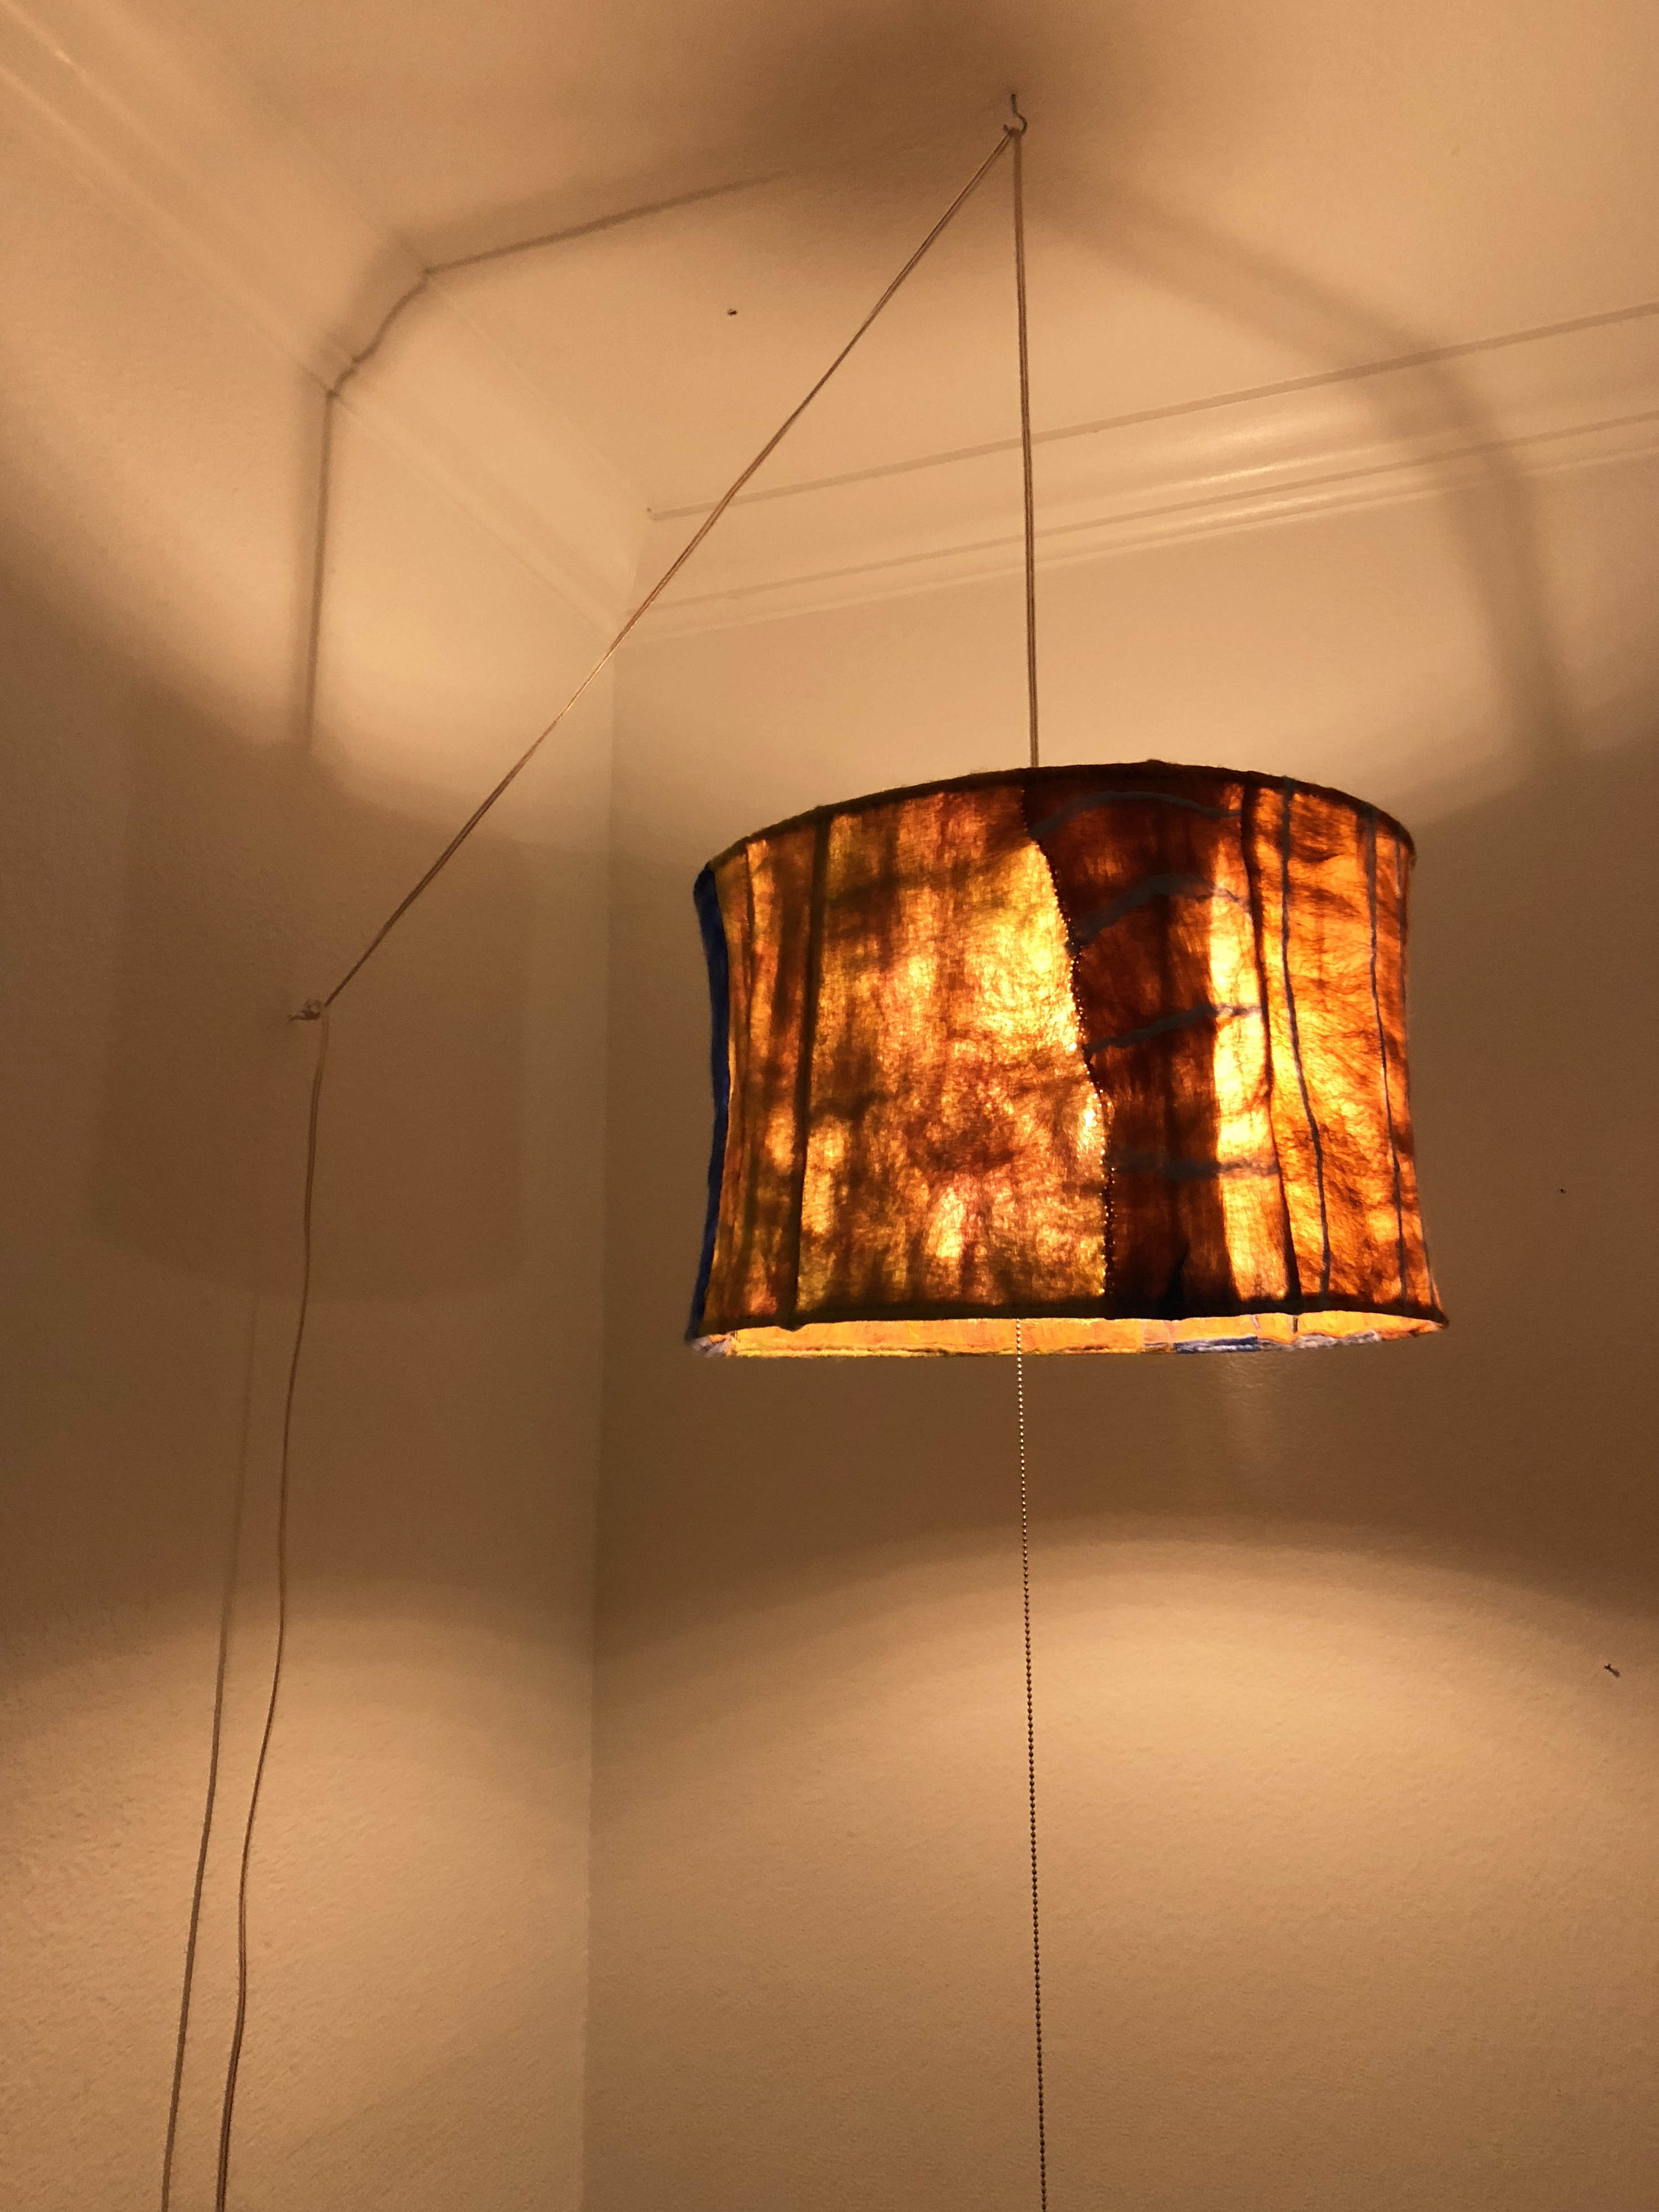 Detail of a felt lamp hanging from the ceiling of a kitchen emitting warm light